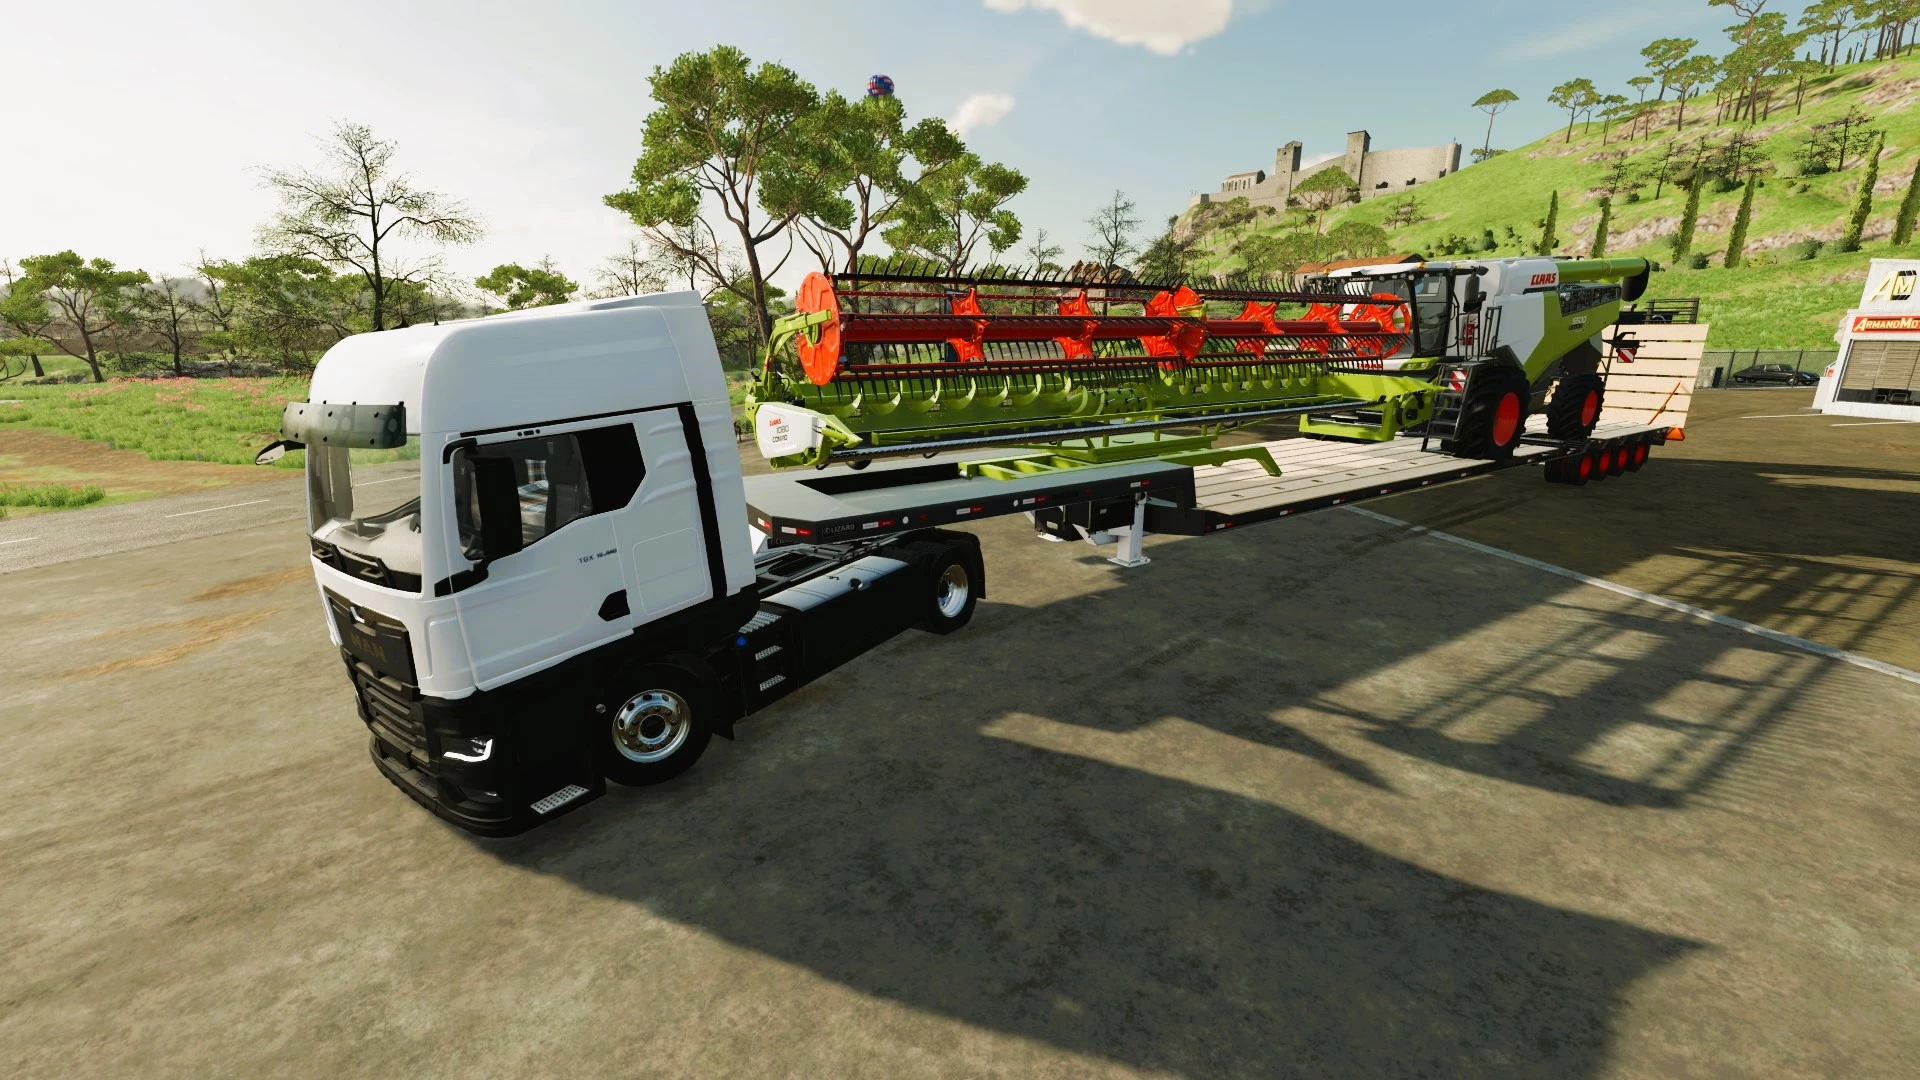 Claas delivery